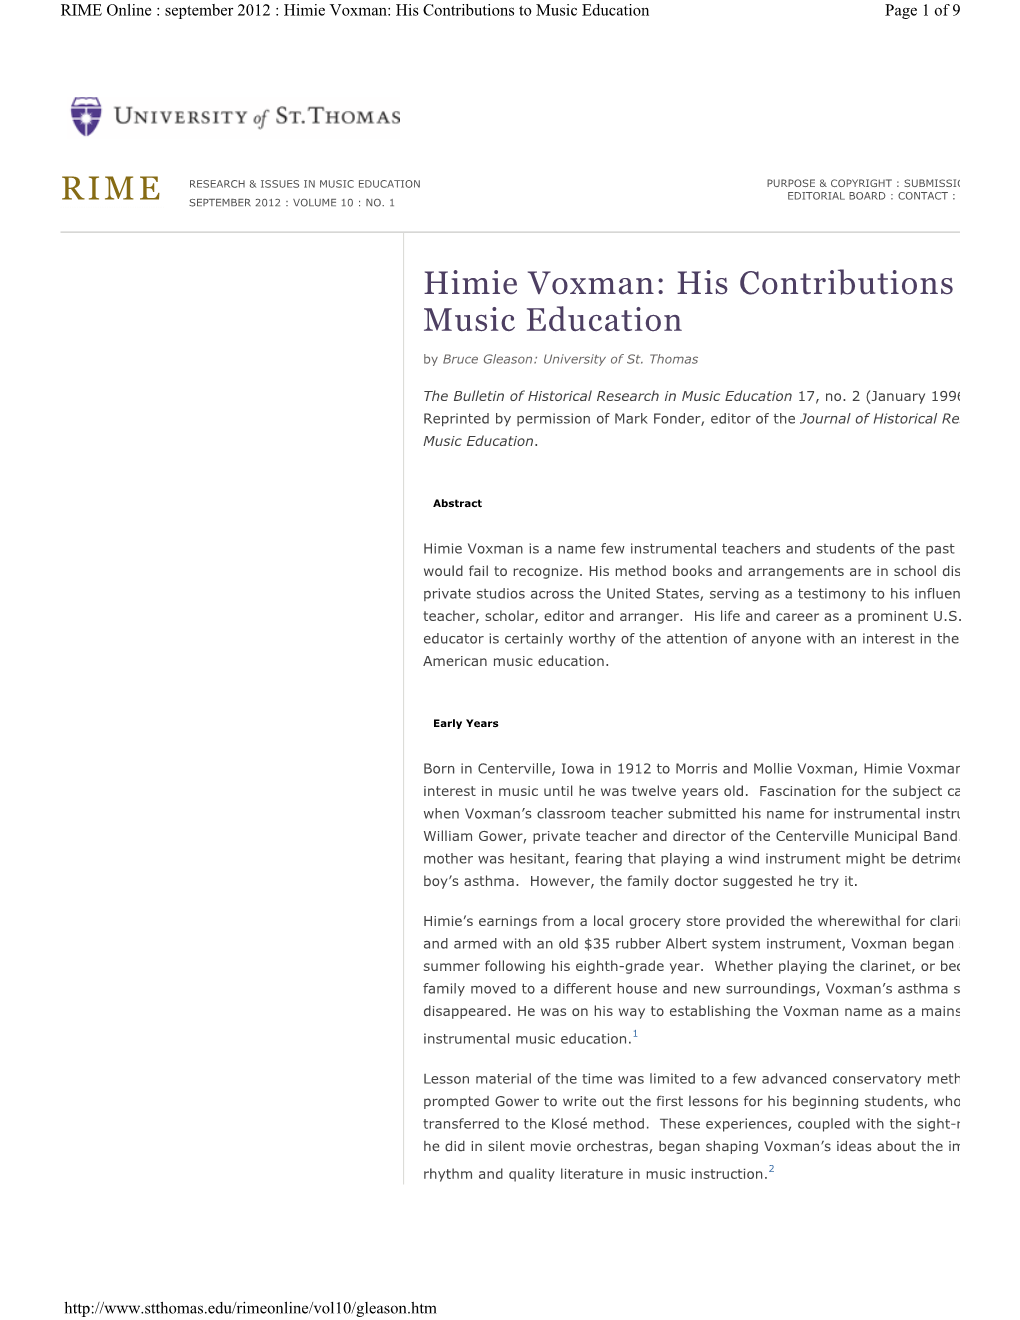 Himie Voxman: His Contributions to Music Education Page 1 of 9